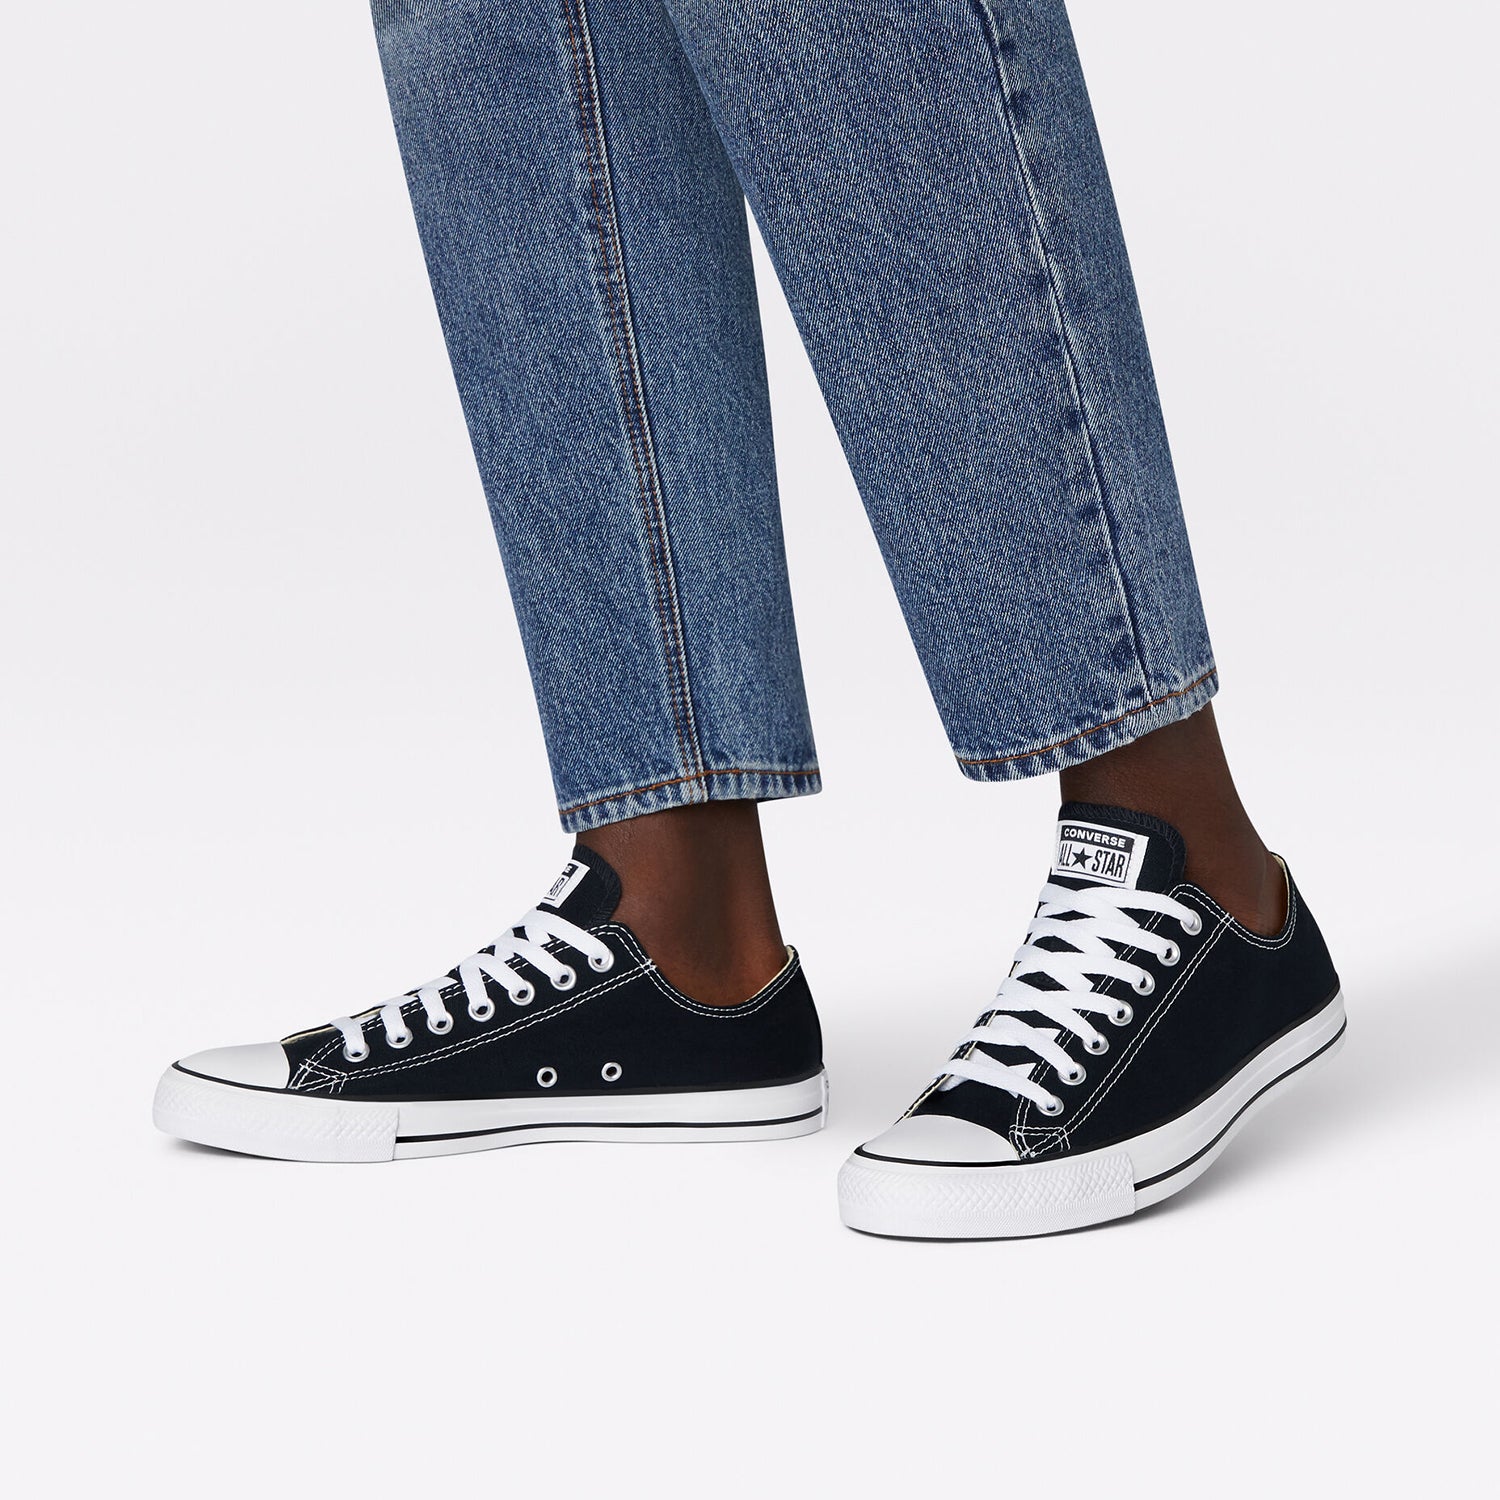 Converse Chuck Taylor All Shoes Black W9166 | Chicago City Sports